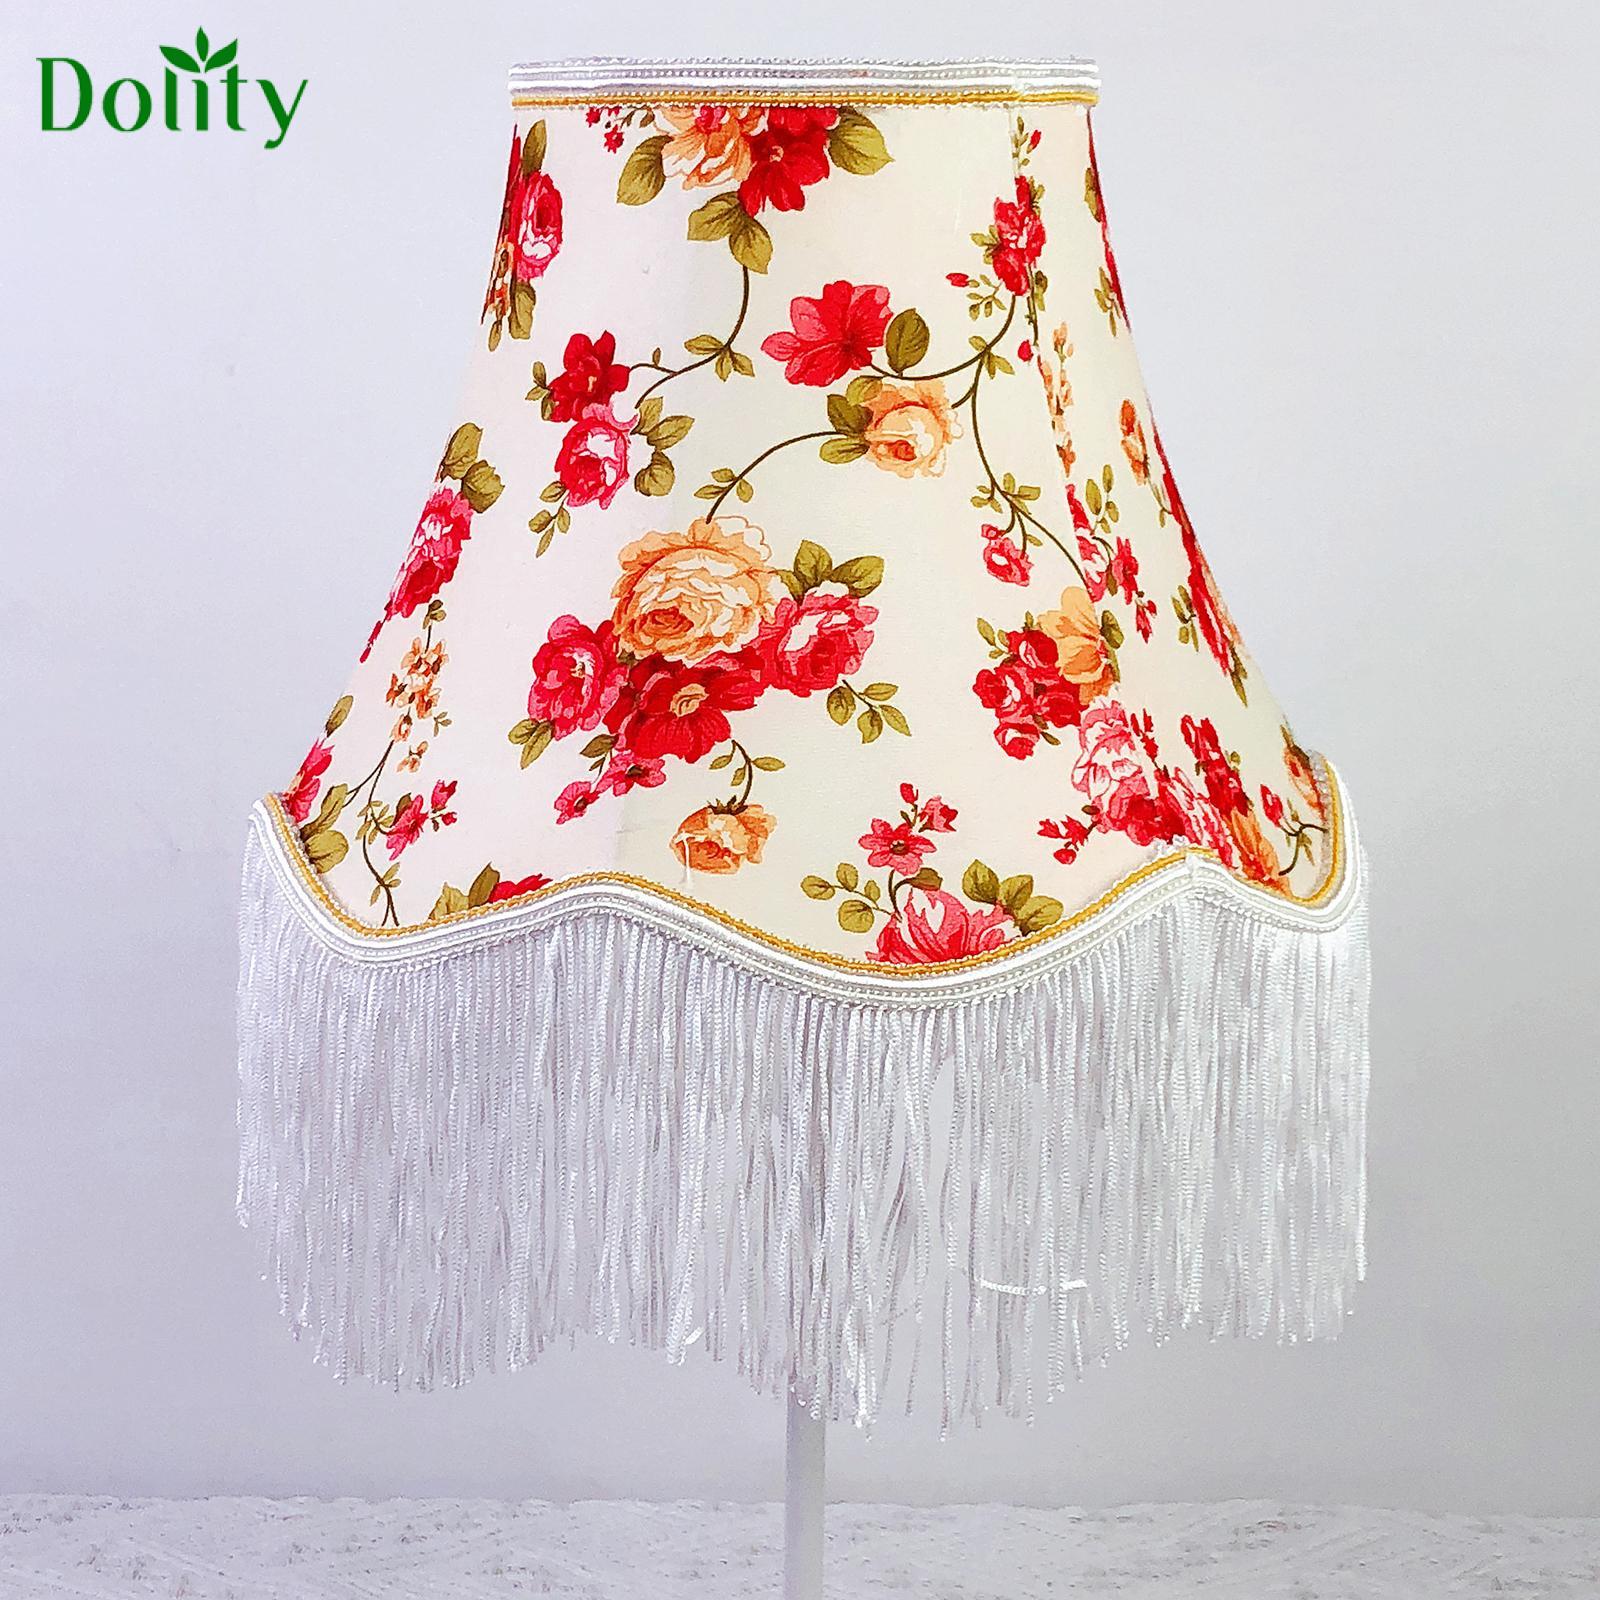 Dolity Lamp Shade with Fringe European Lampshade for Cafe Dining Room